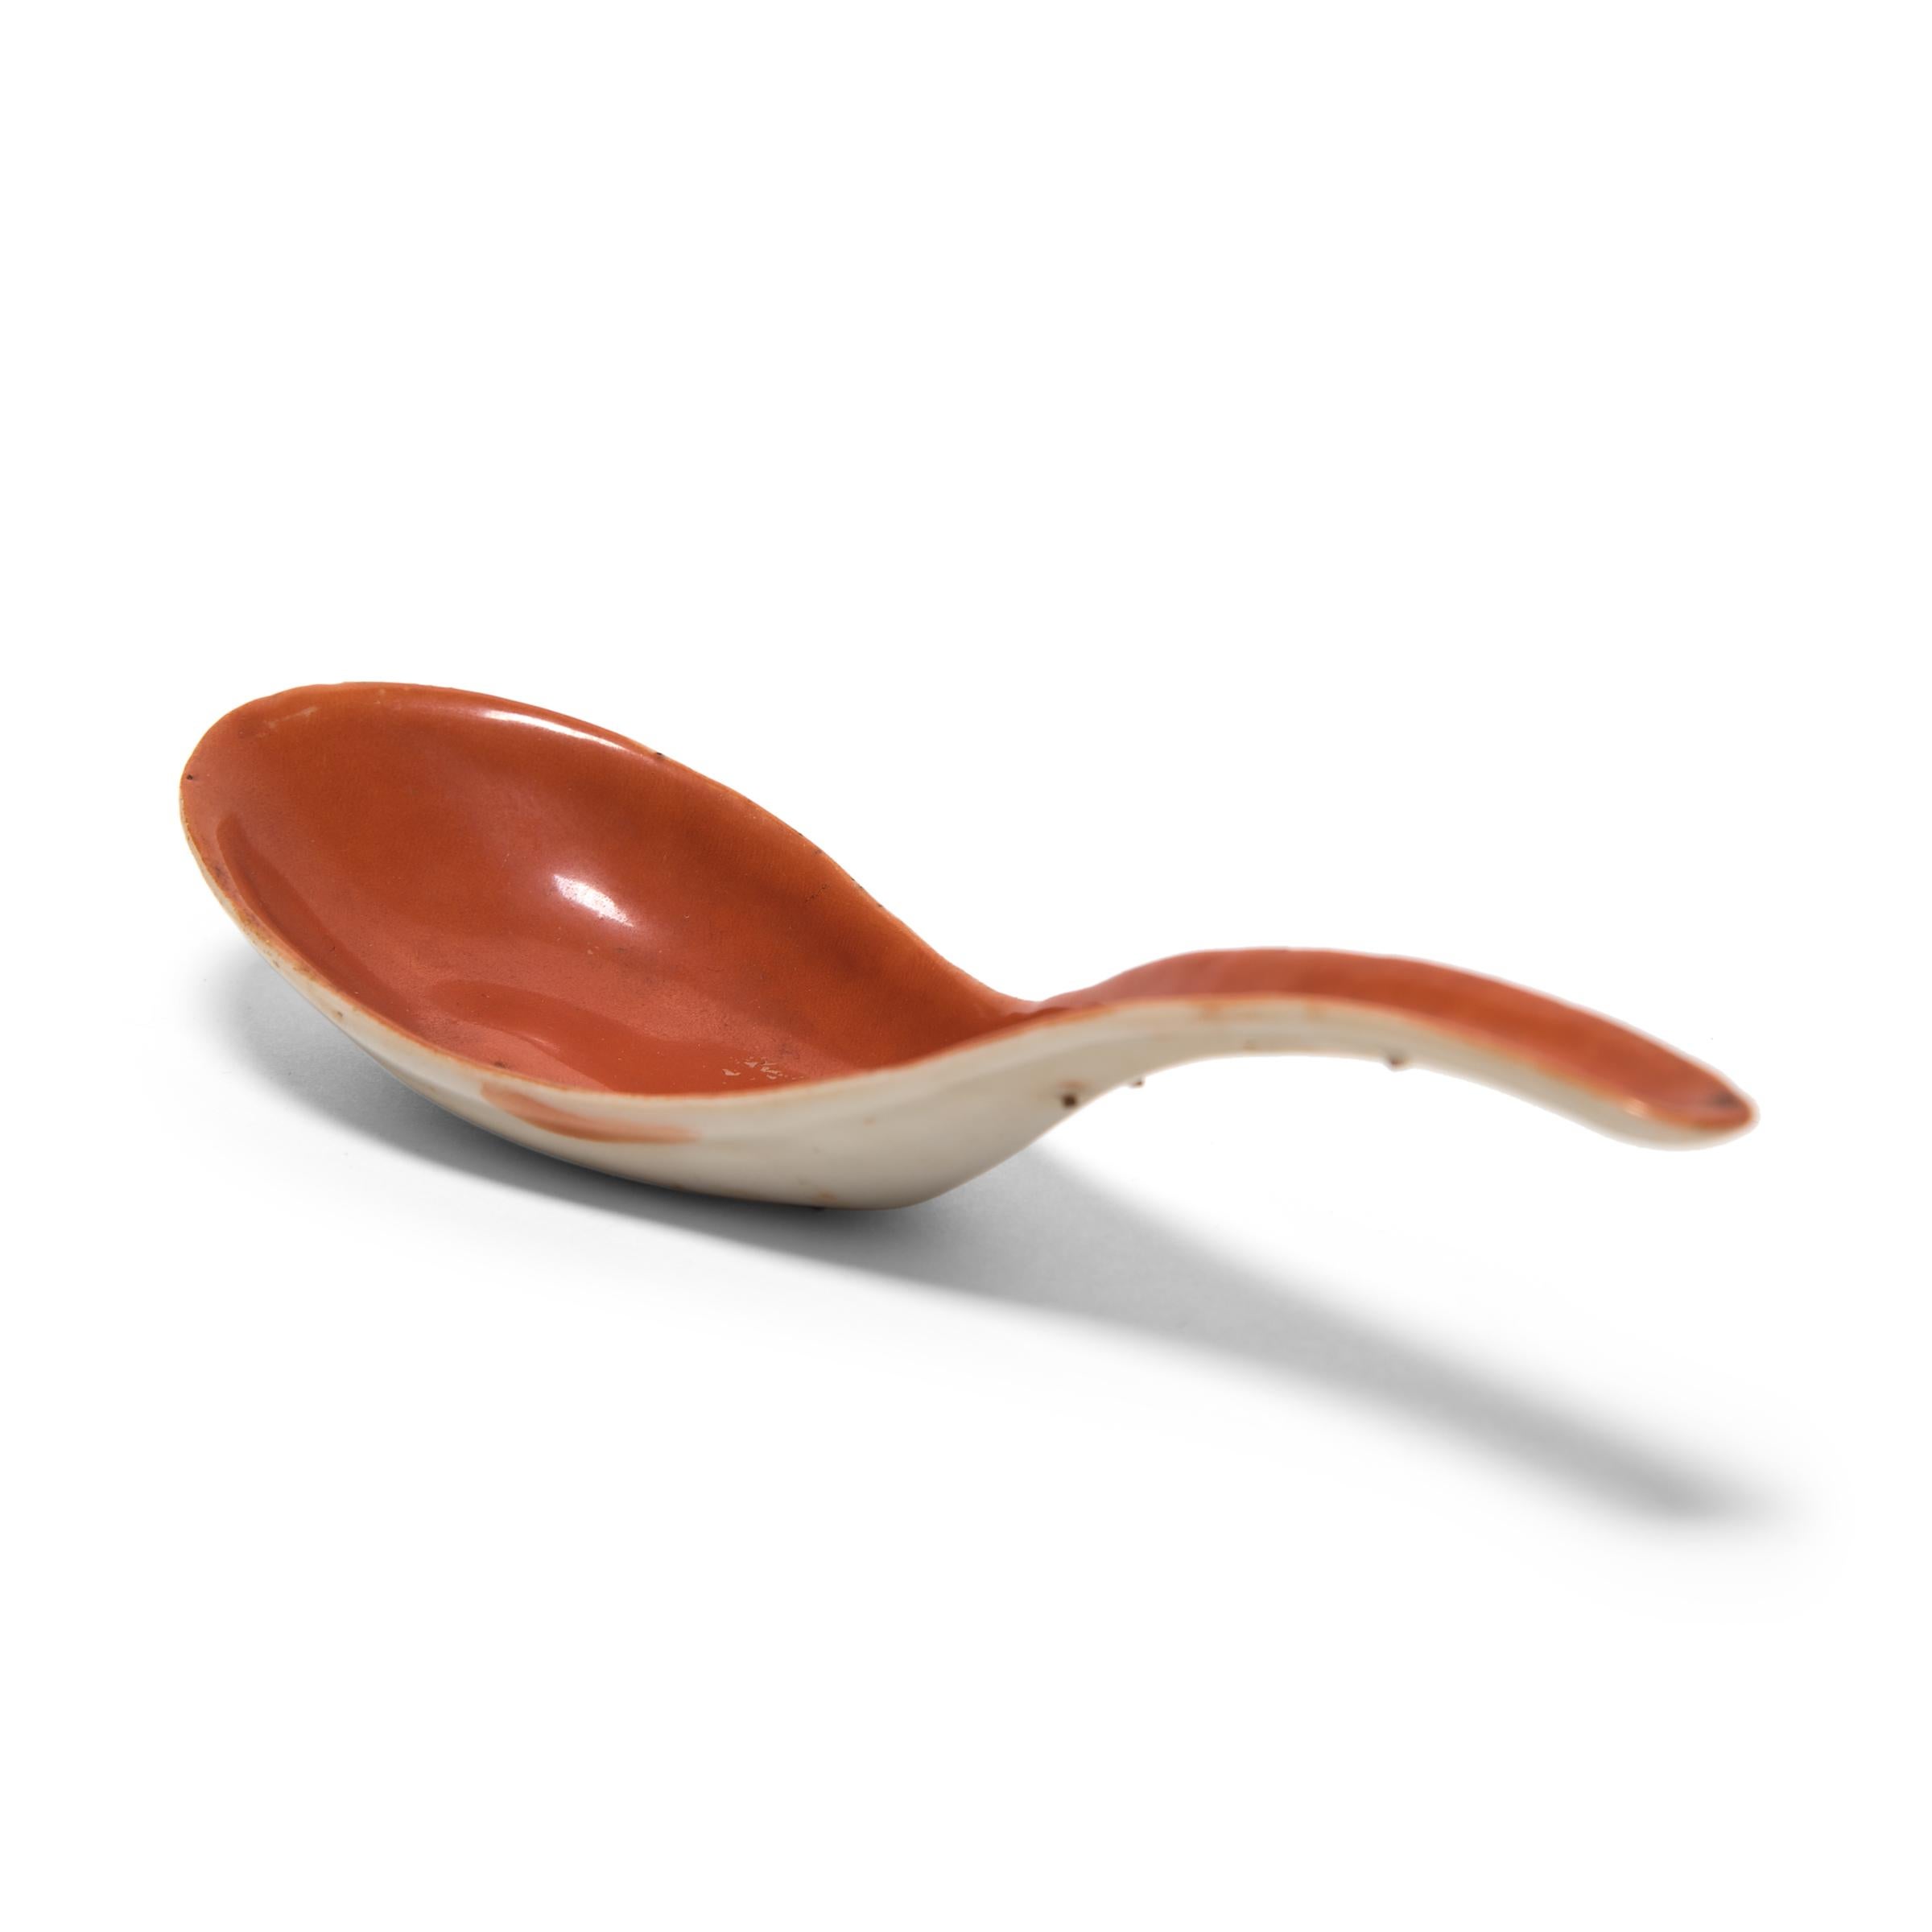 Glazed Chinese Red Soup Spoon, c. 1850